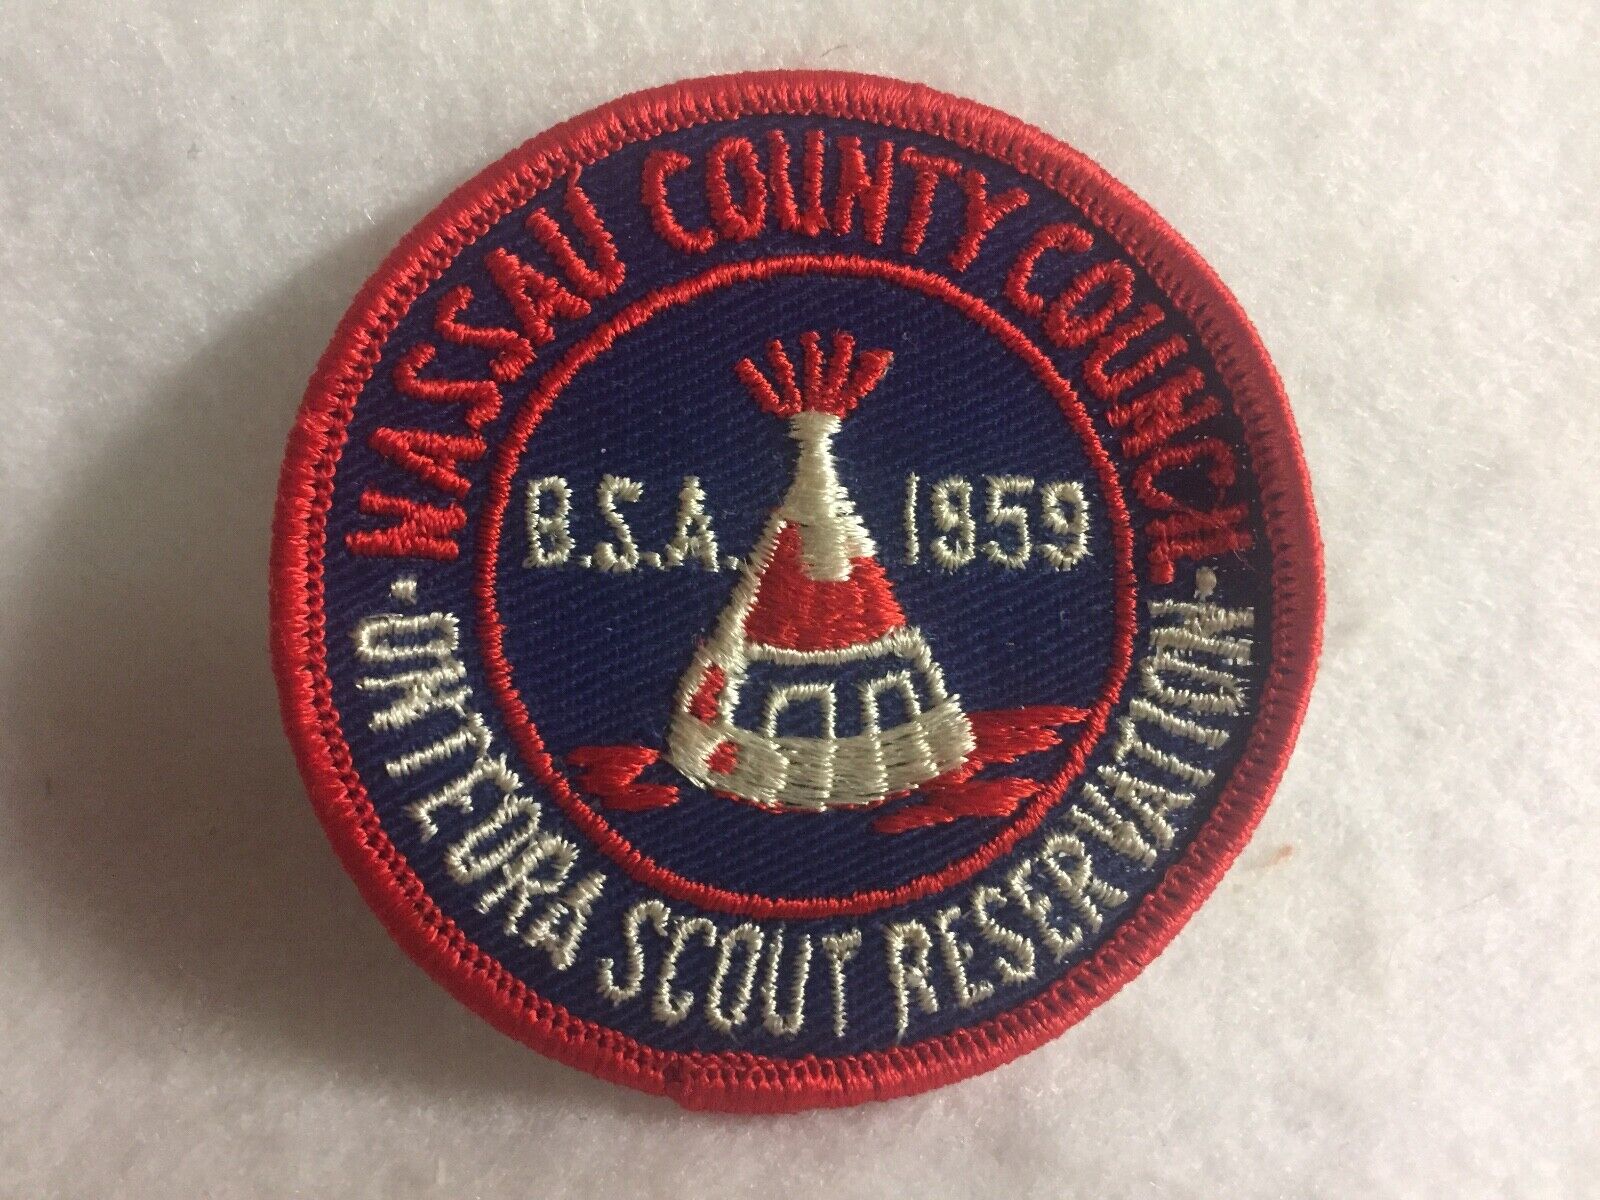 (17). Boy Scouts -  1959 Onteora Scout Reservation patch